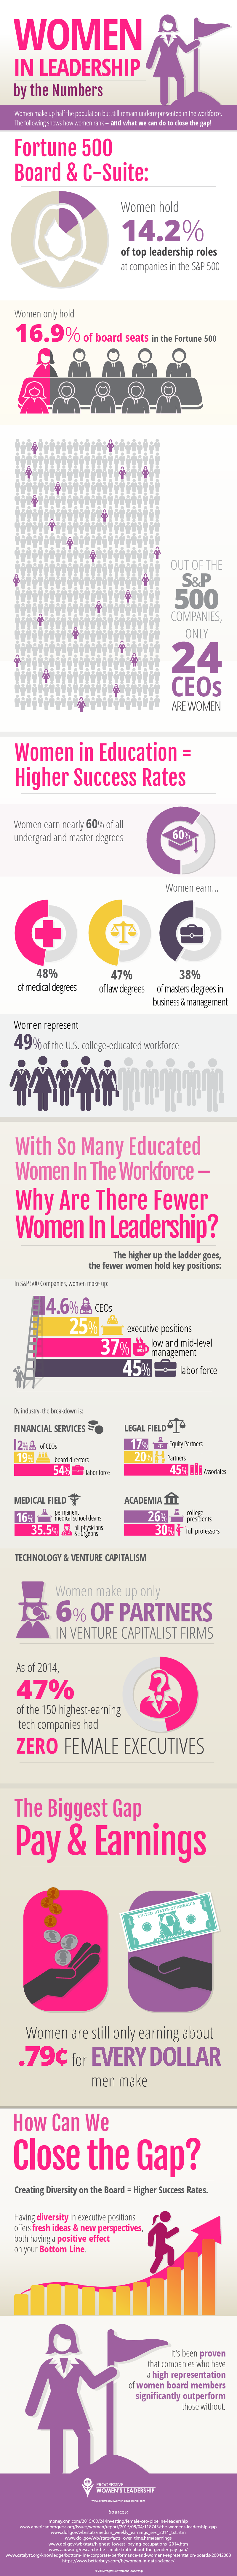 Women-in-leadership-by-the-numbers-pwl-infographic